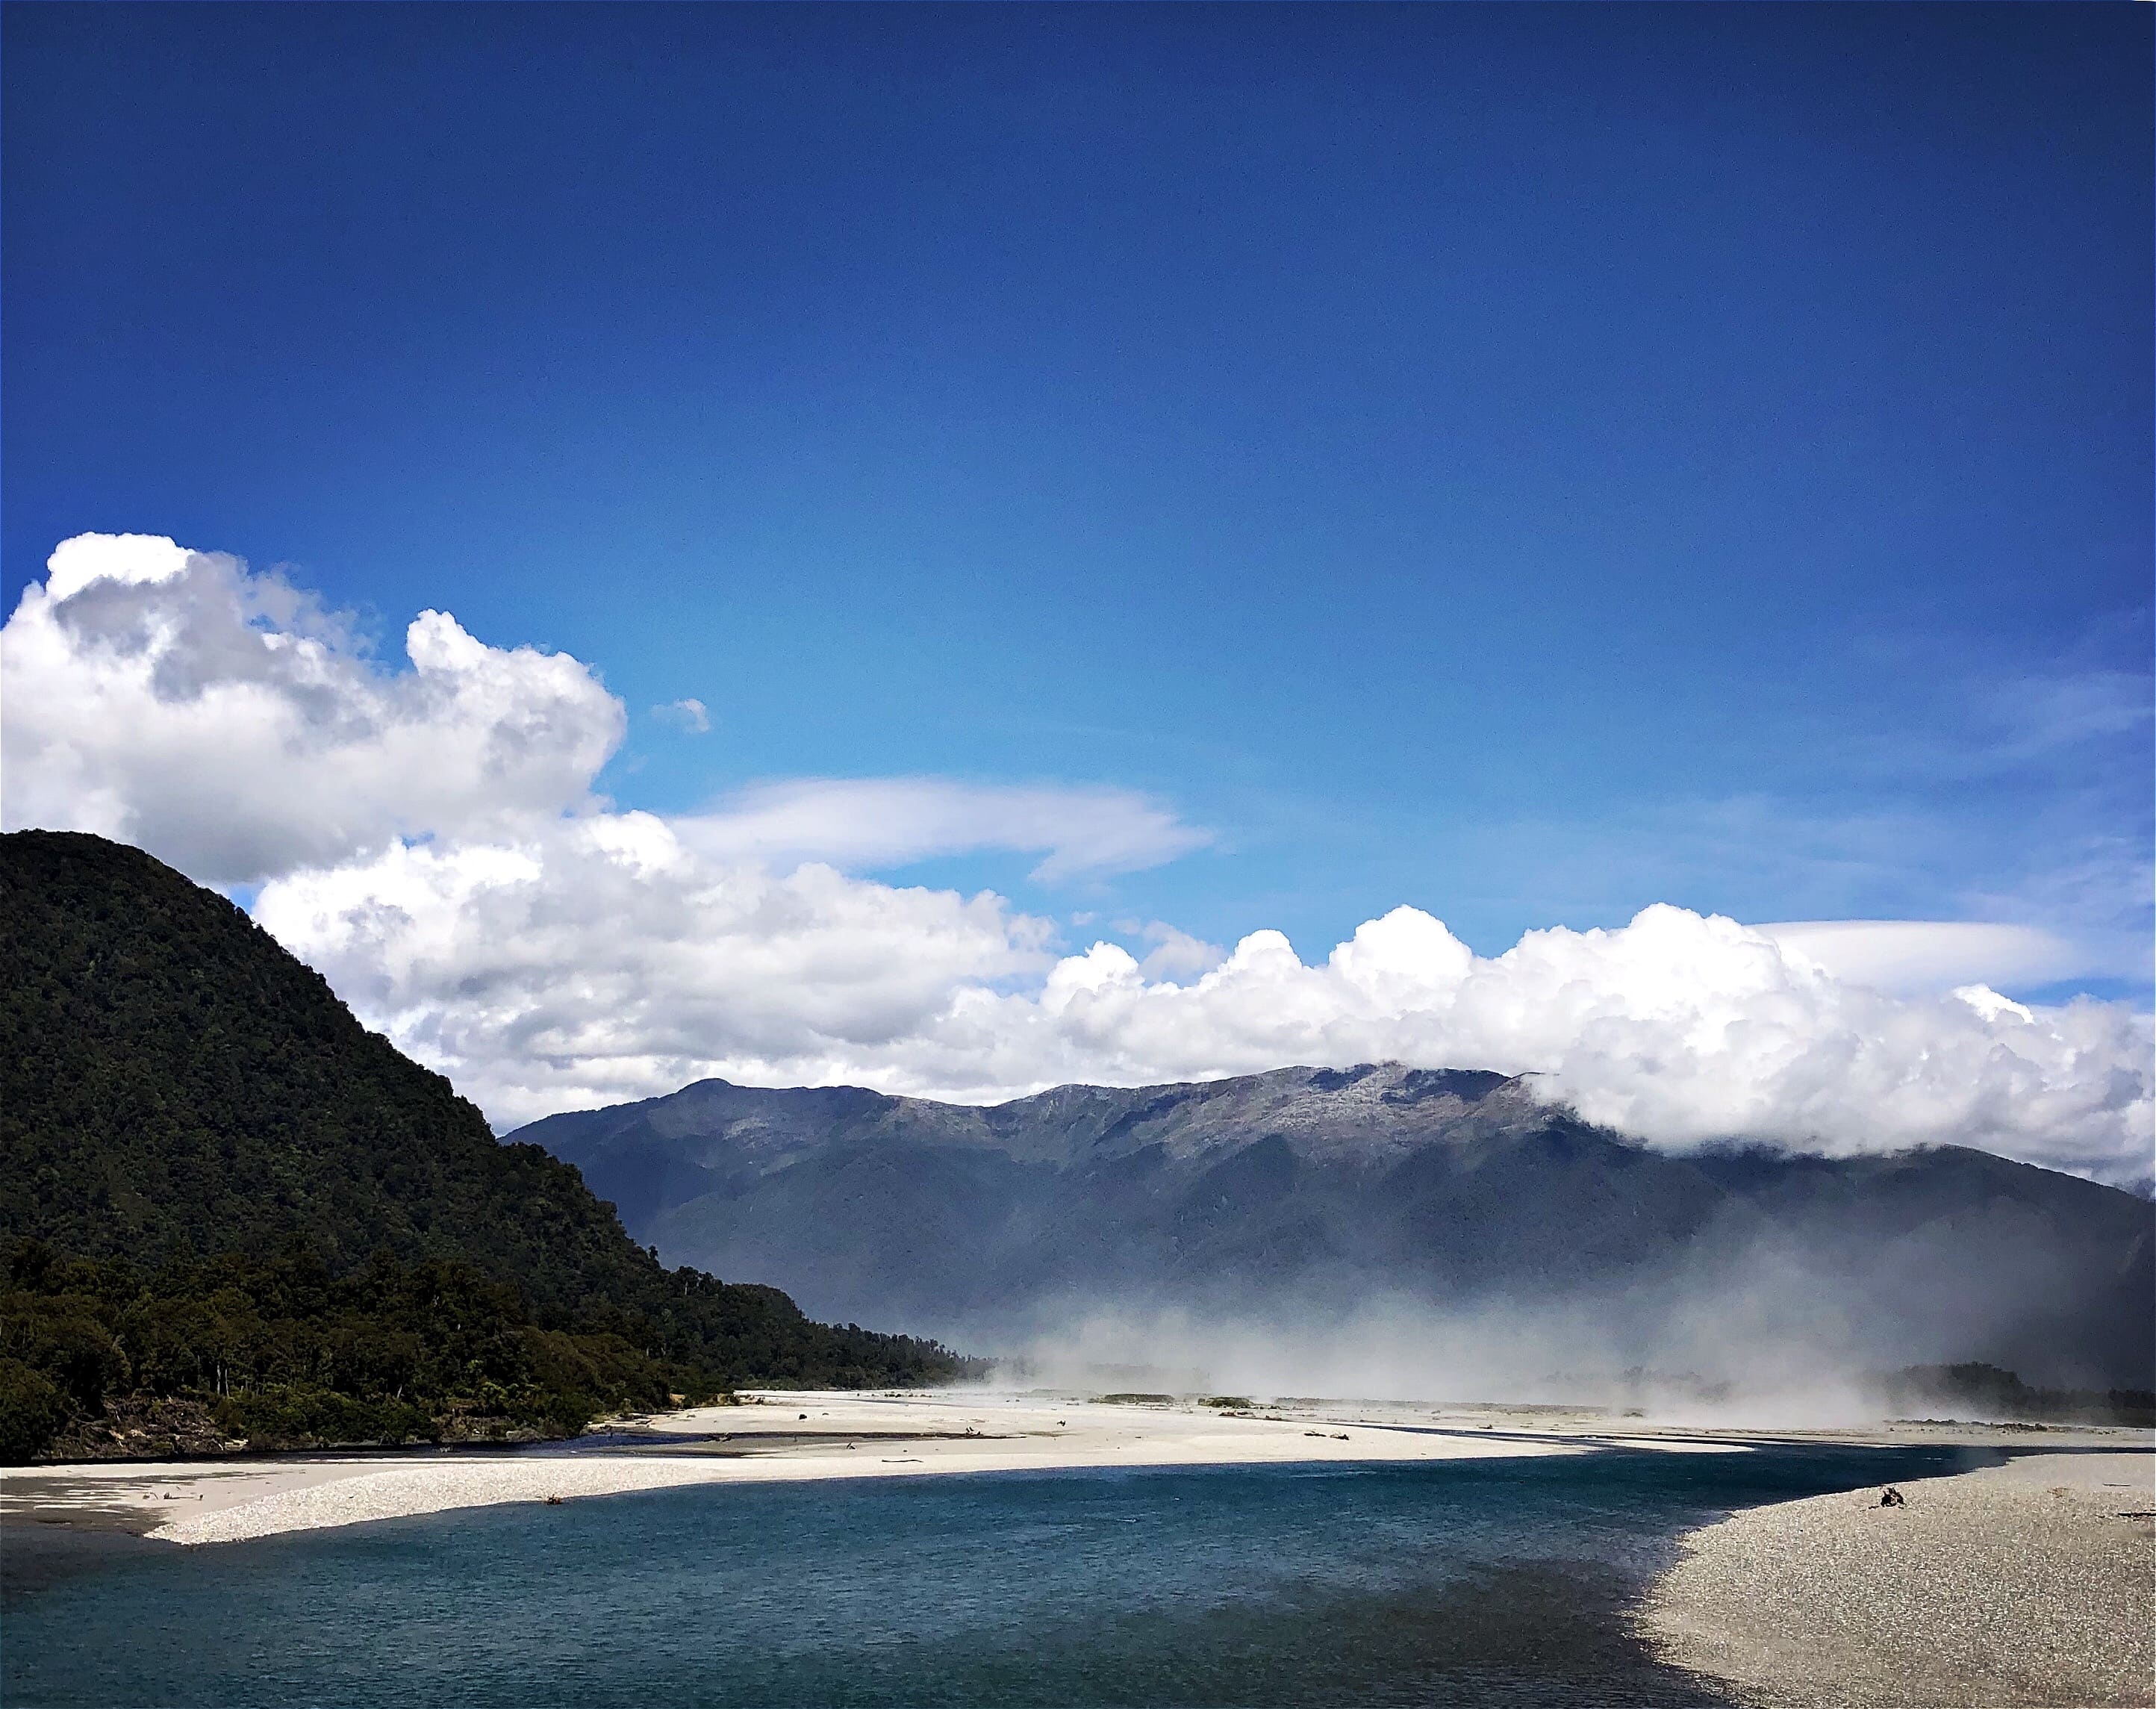 A view of the mountains and river near Haast, a UNESCO World Heritage site.